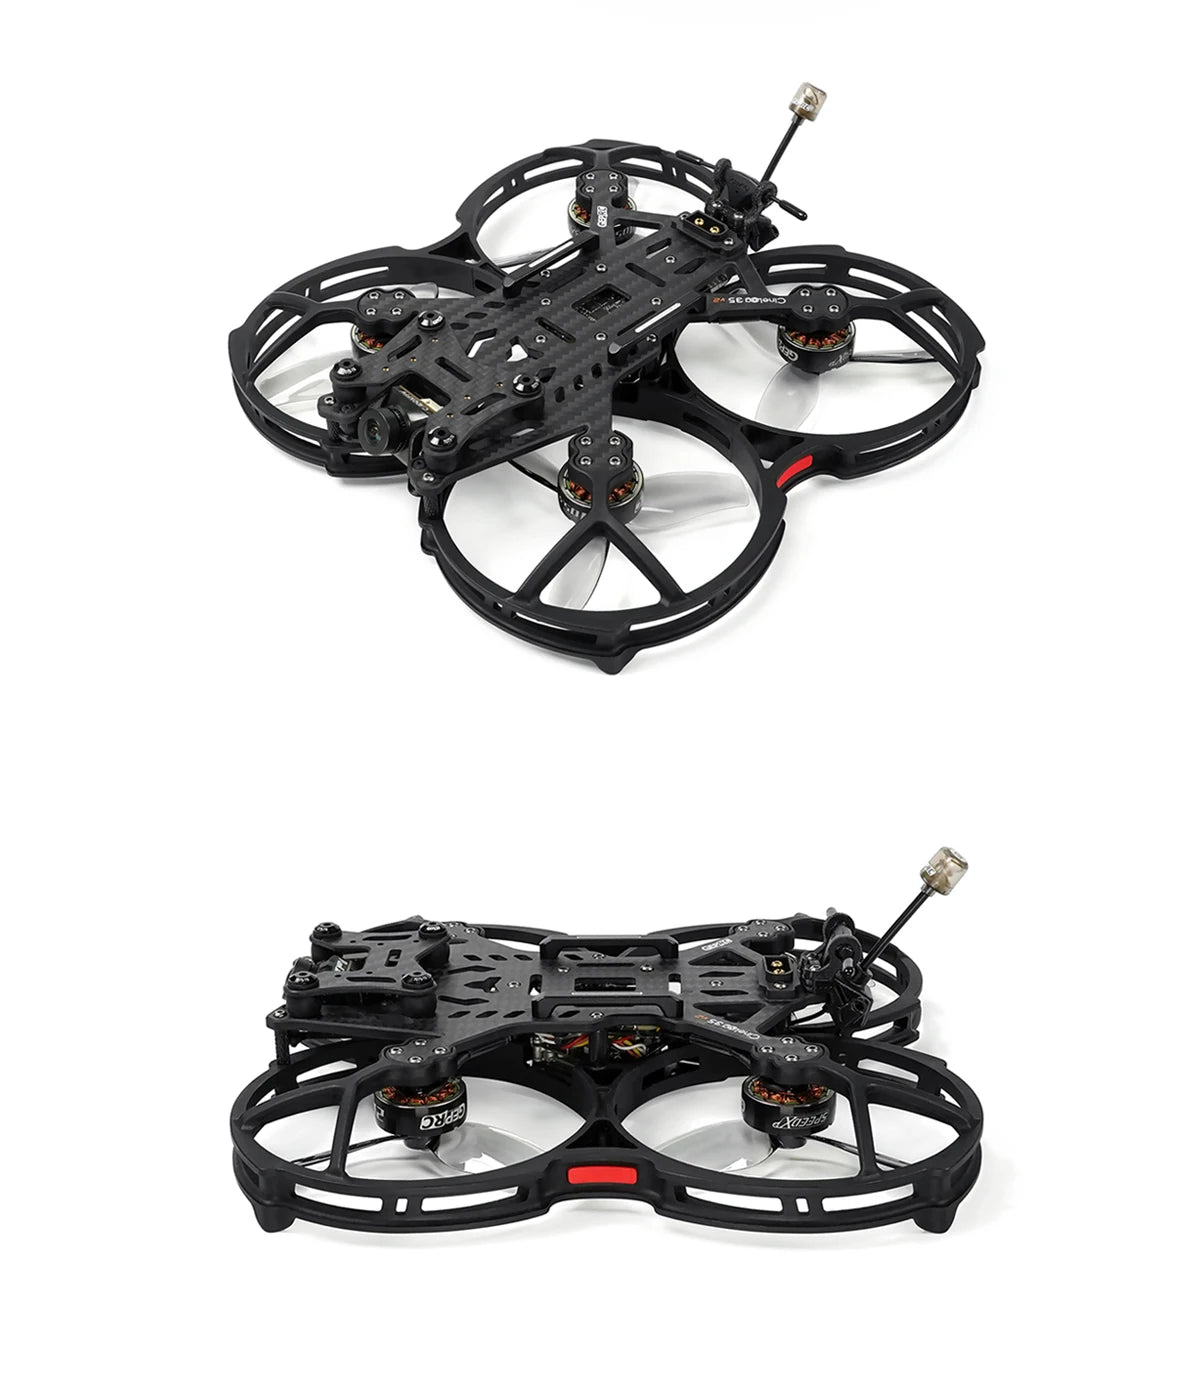 GEPRC Cinelog35 V2 Analog FPV Drone, Propeller Guard adds memory card and USB ports to O3 Air Unit for easy data reading